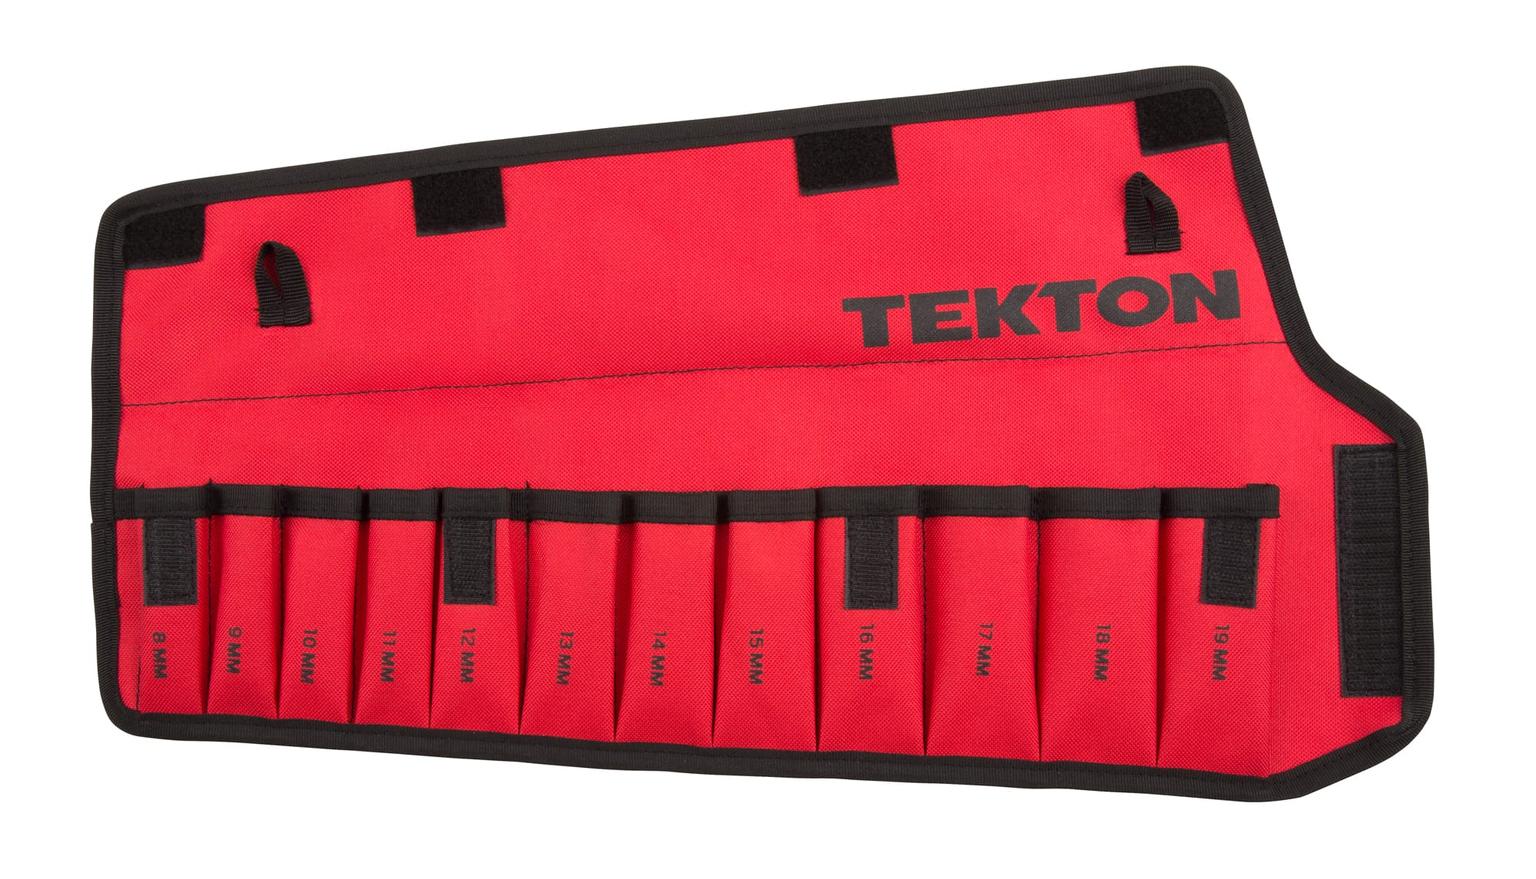 TEKTON ORG27212-T 12-Tool Stubby Combination Wrench Pouch (8-19 mm)